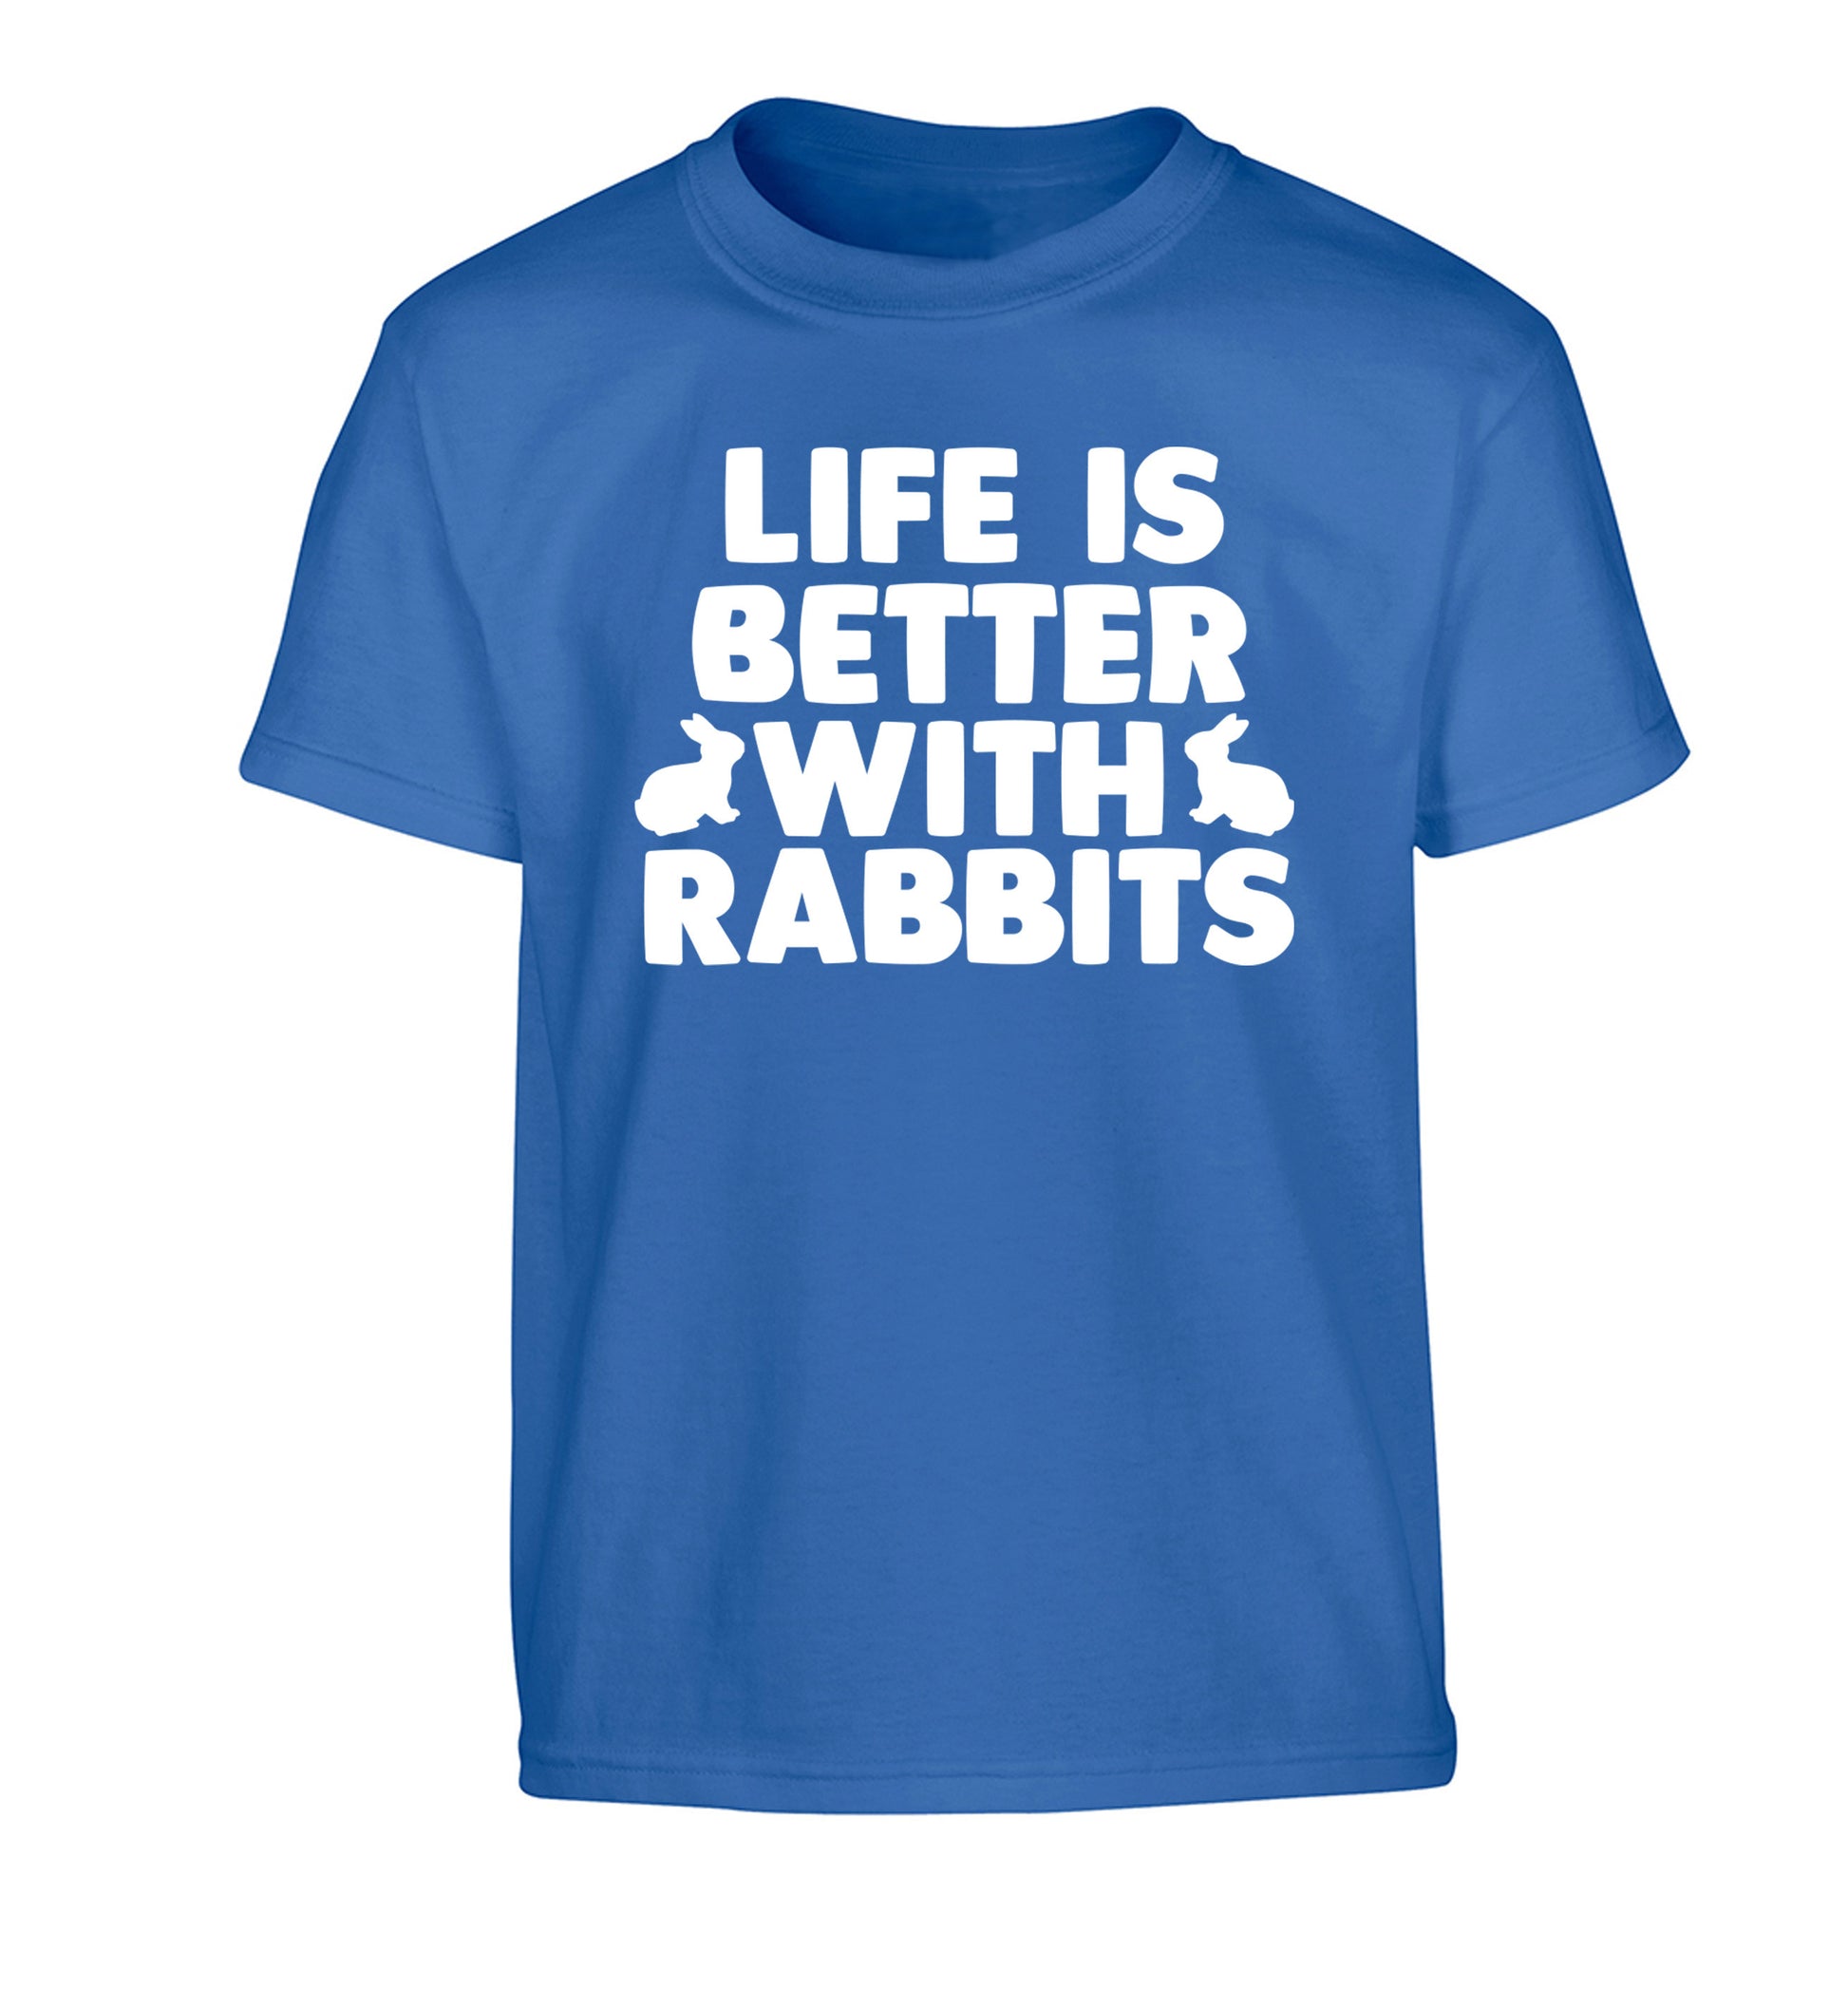 Life is better with rabbits Children's blue Tshirt 12-14 Years